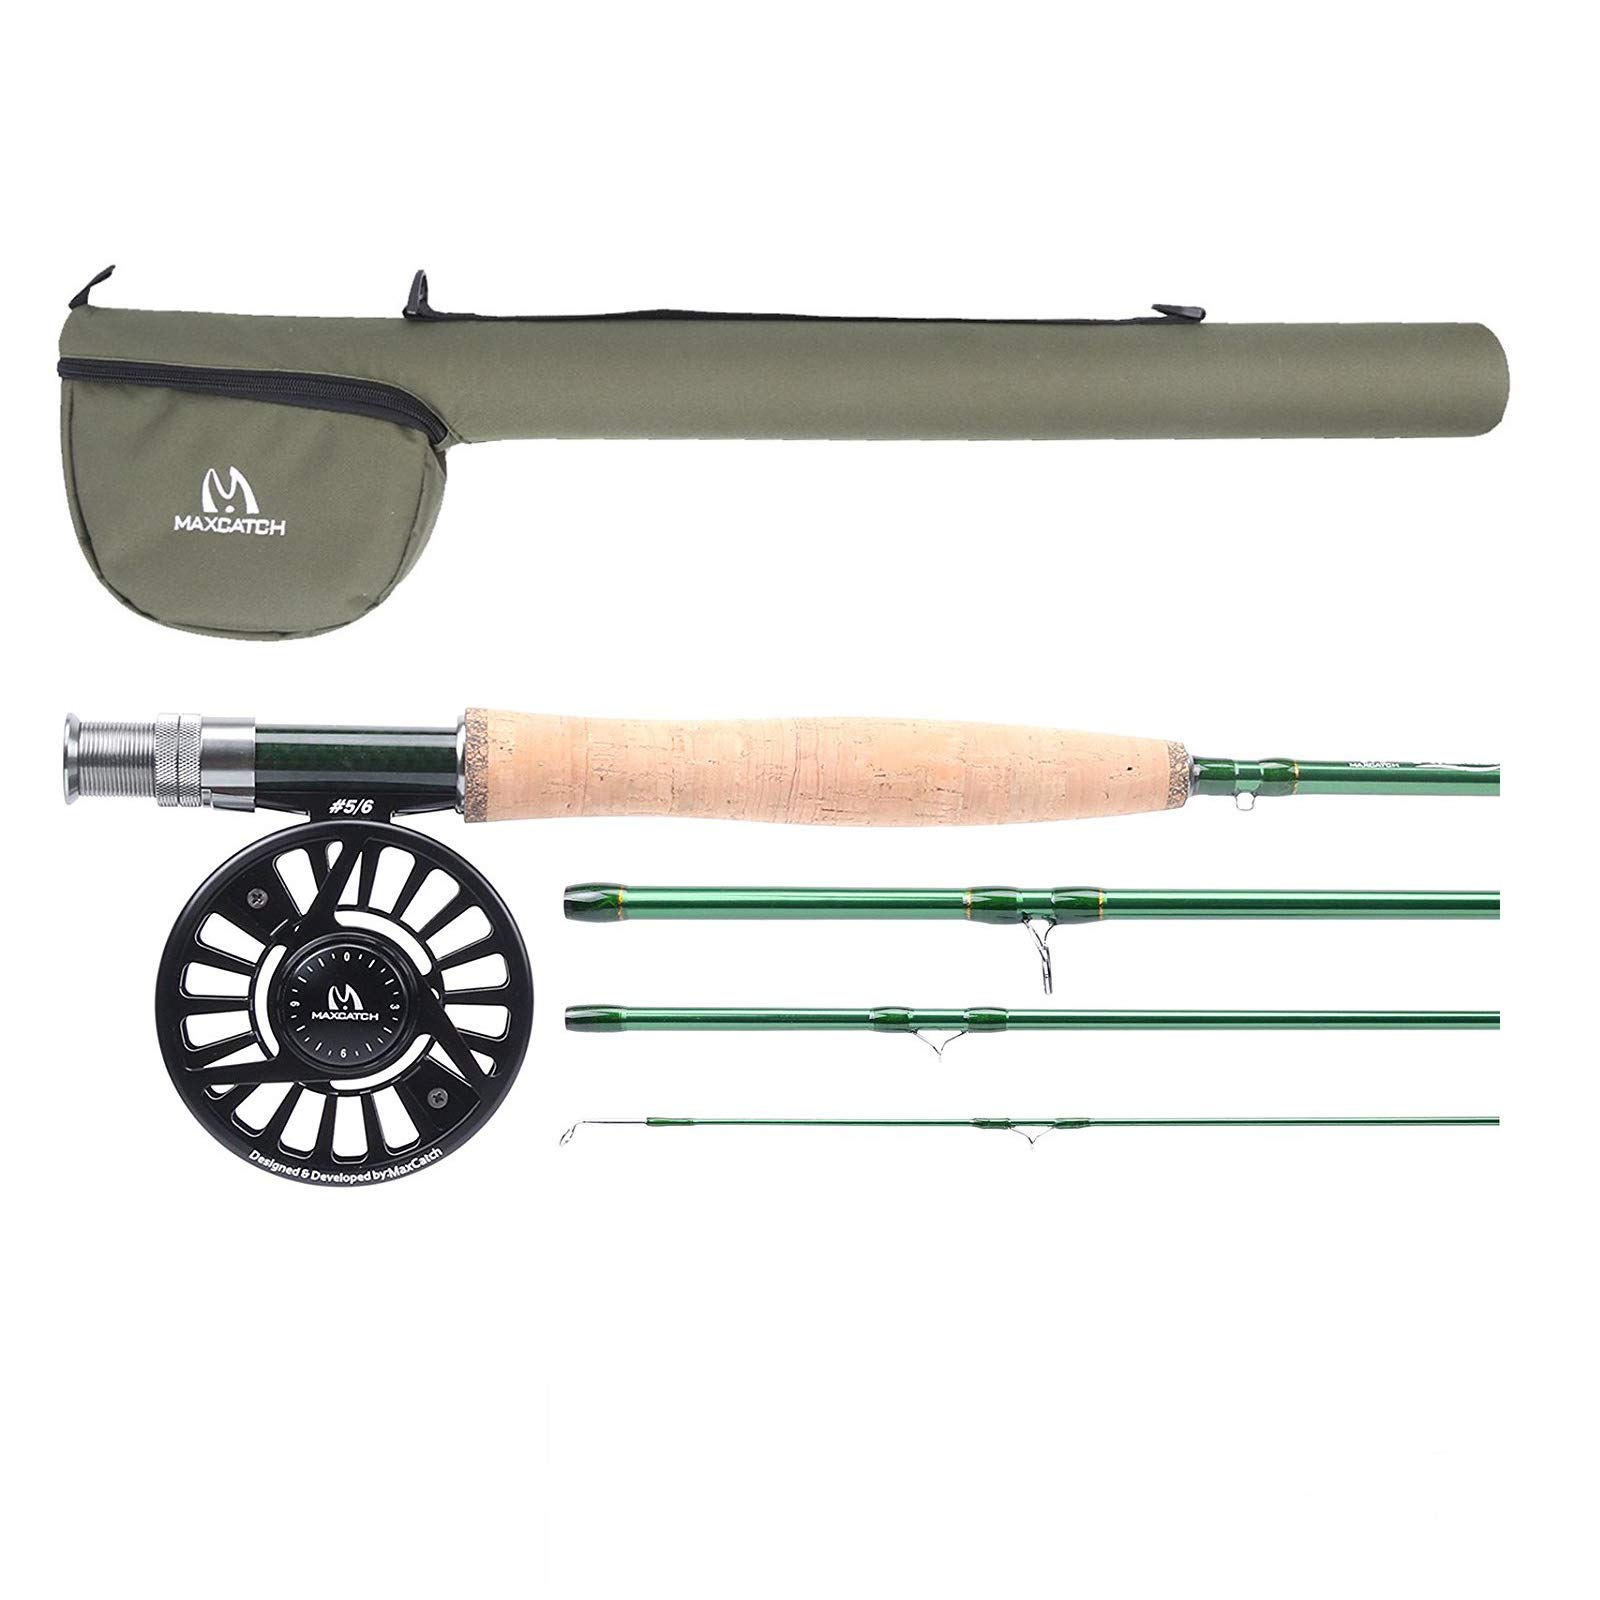 M MAXIMUMCATCH Maxcatch Premier Fly Fishing Rod with Avid Fly Reel and Rod  Case: 3/4, 5/6, 7/8-weight Rod and Reel Combo Black 9ft 8wt rod+7/8wt reel